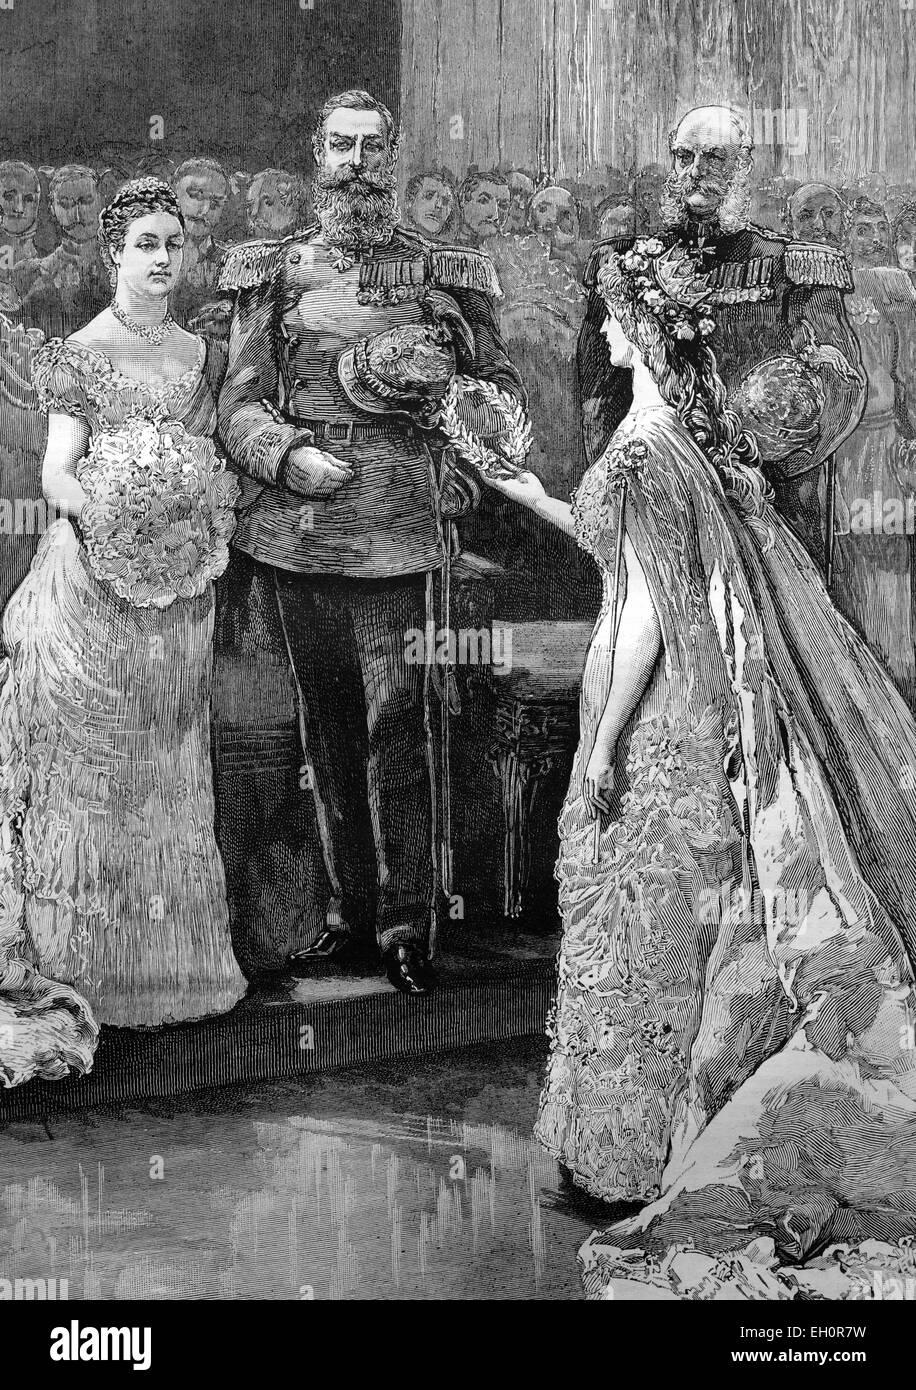 'The Silver Wedding of the Imperial Prince and Princess of Germany, the ''Koenigin Minne'' or ''Queen of Love'' presenting a silver wreath to the Imperial Princess, historical illustration, 1884' Stock Photo